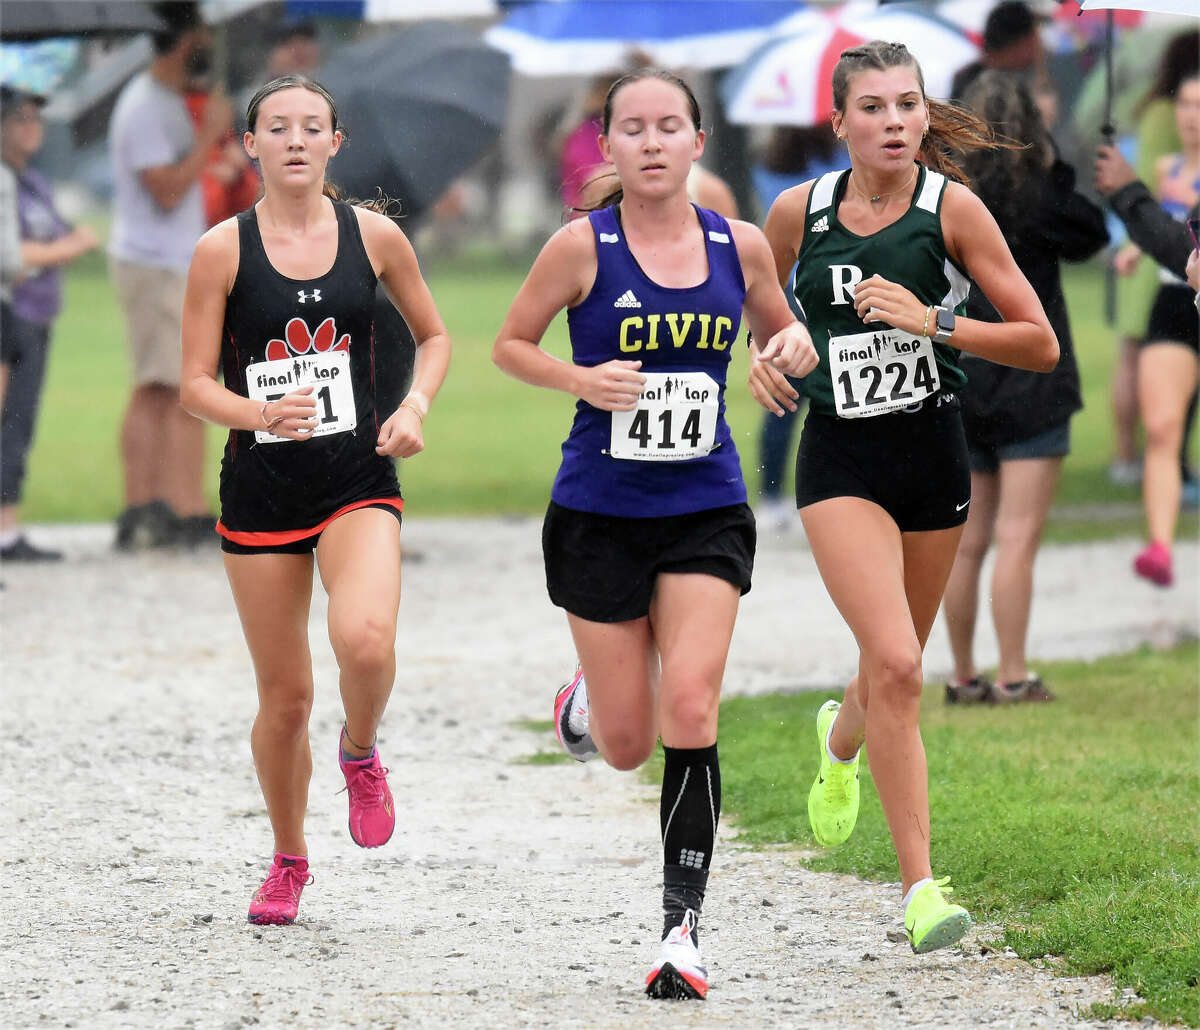 Edwardsville's Emily Nuttall, left, runs with Civic Memorial's Hannah Meiser, center, and Rock Bridge's Mae Walker in the 49th Granite City High School Robinson/Lang Cross Country Invitational on Saturday inside Wilson Park.